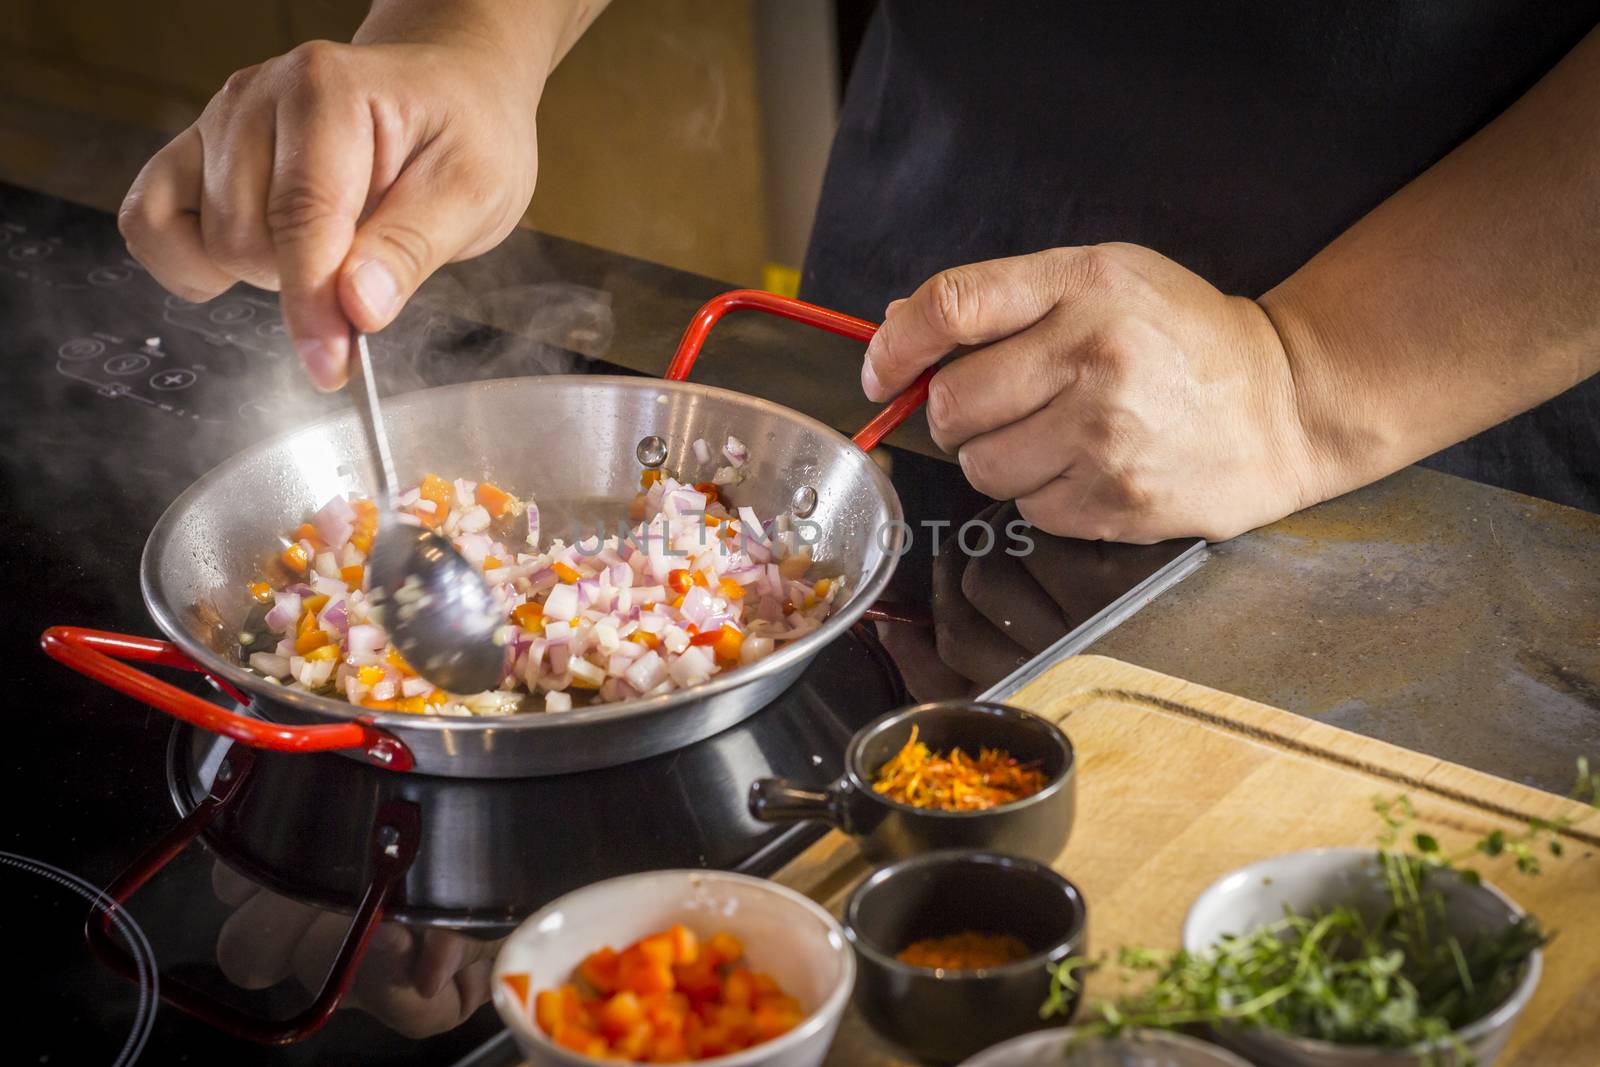 Chef is frying food ingredient for cooking paella.